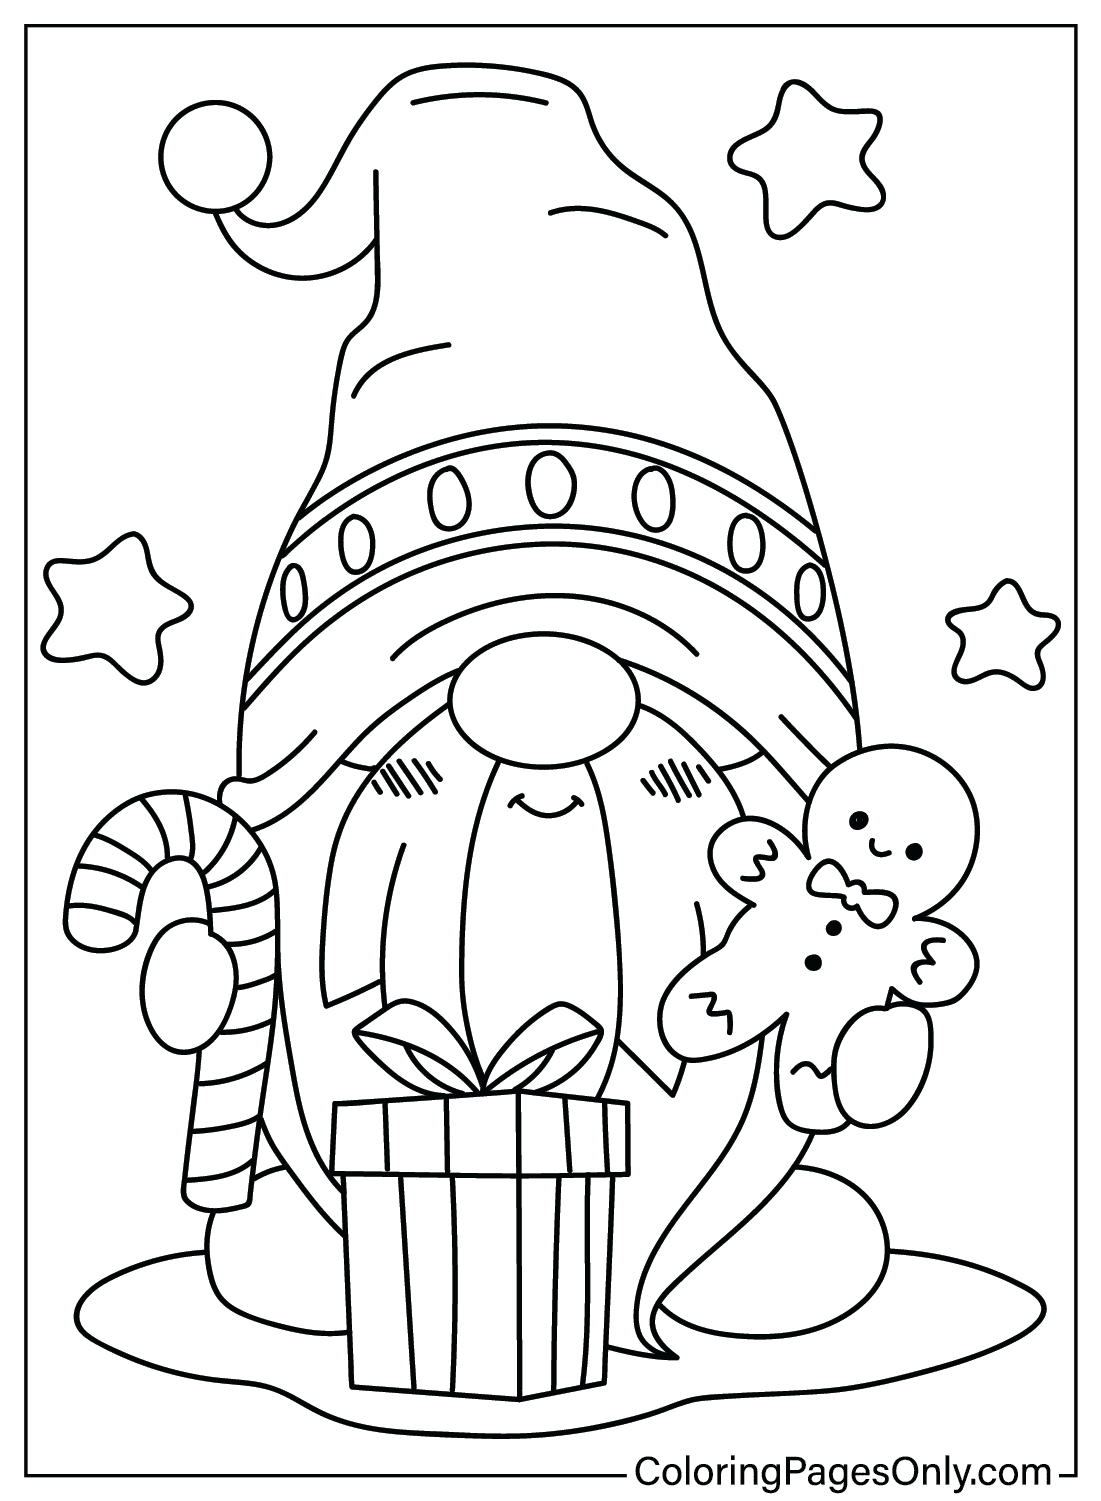 Coloring Page Gnome from Gnome